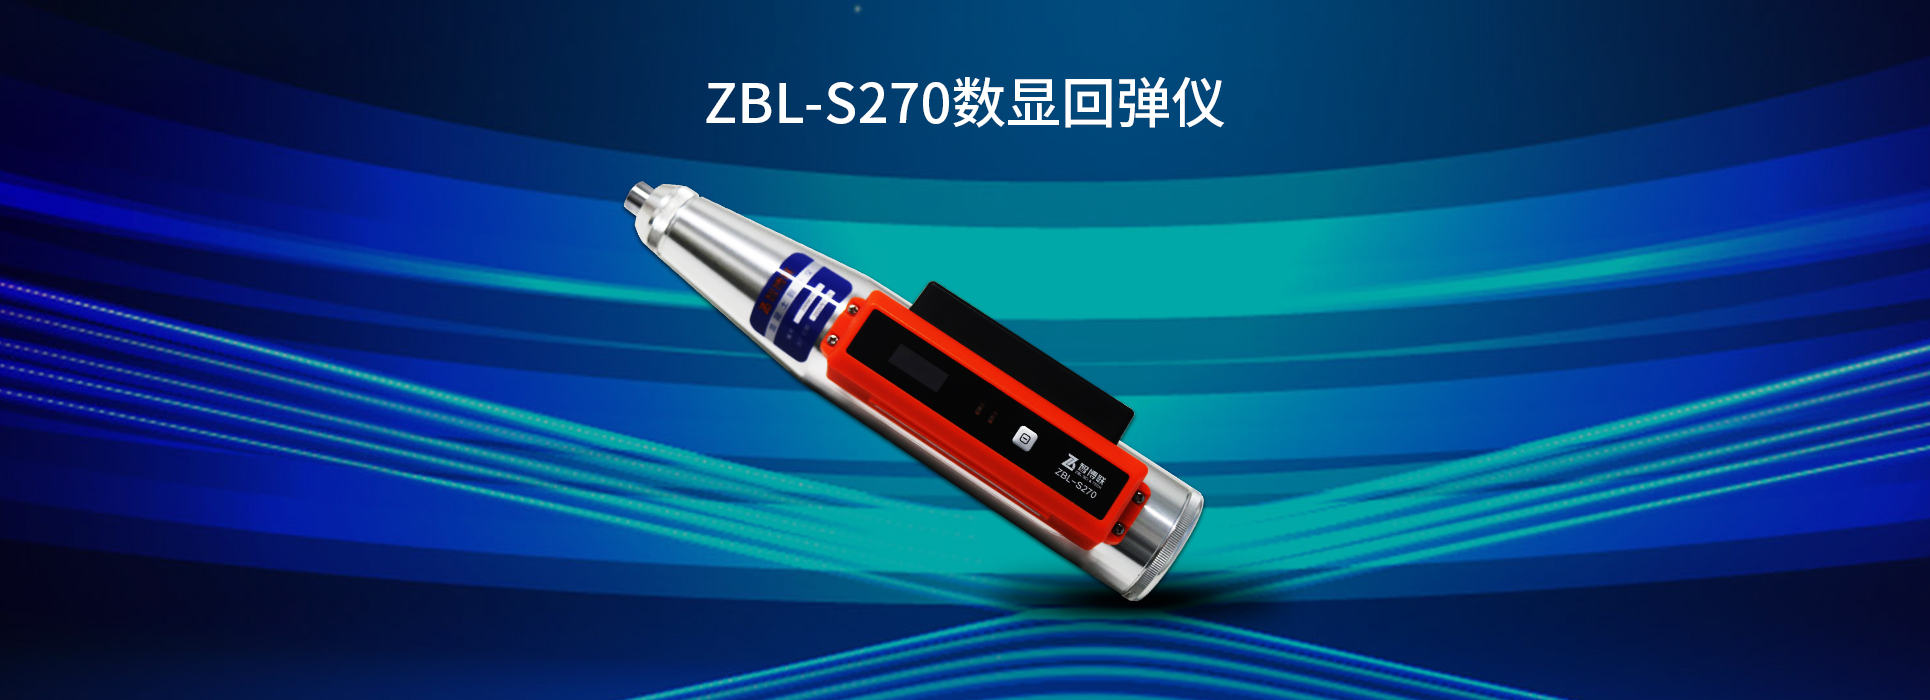 ZBL-S270數顯回彈儀